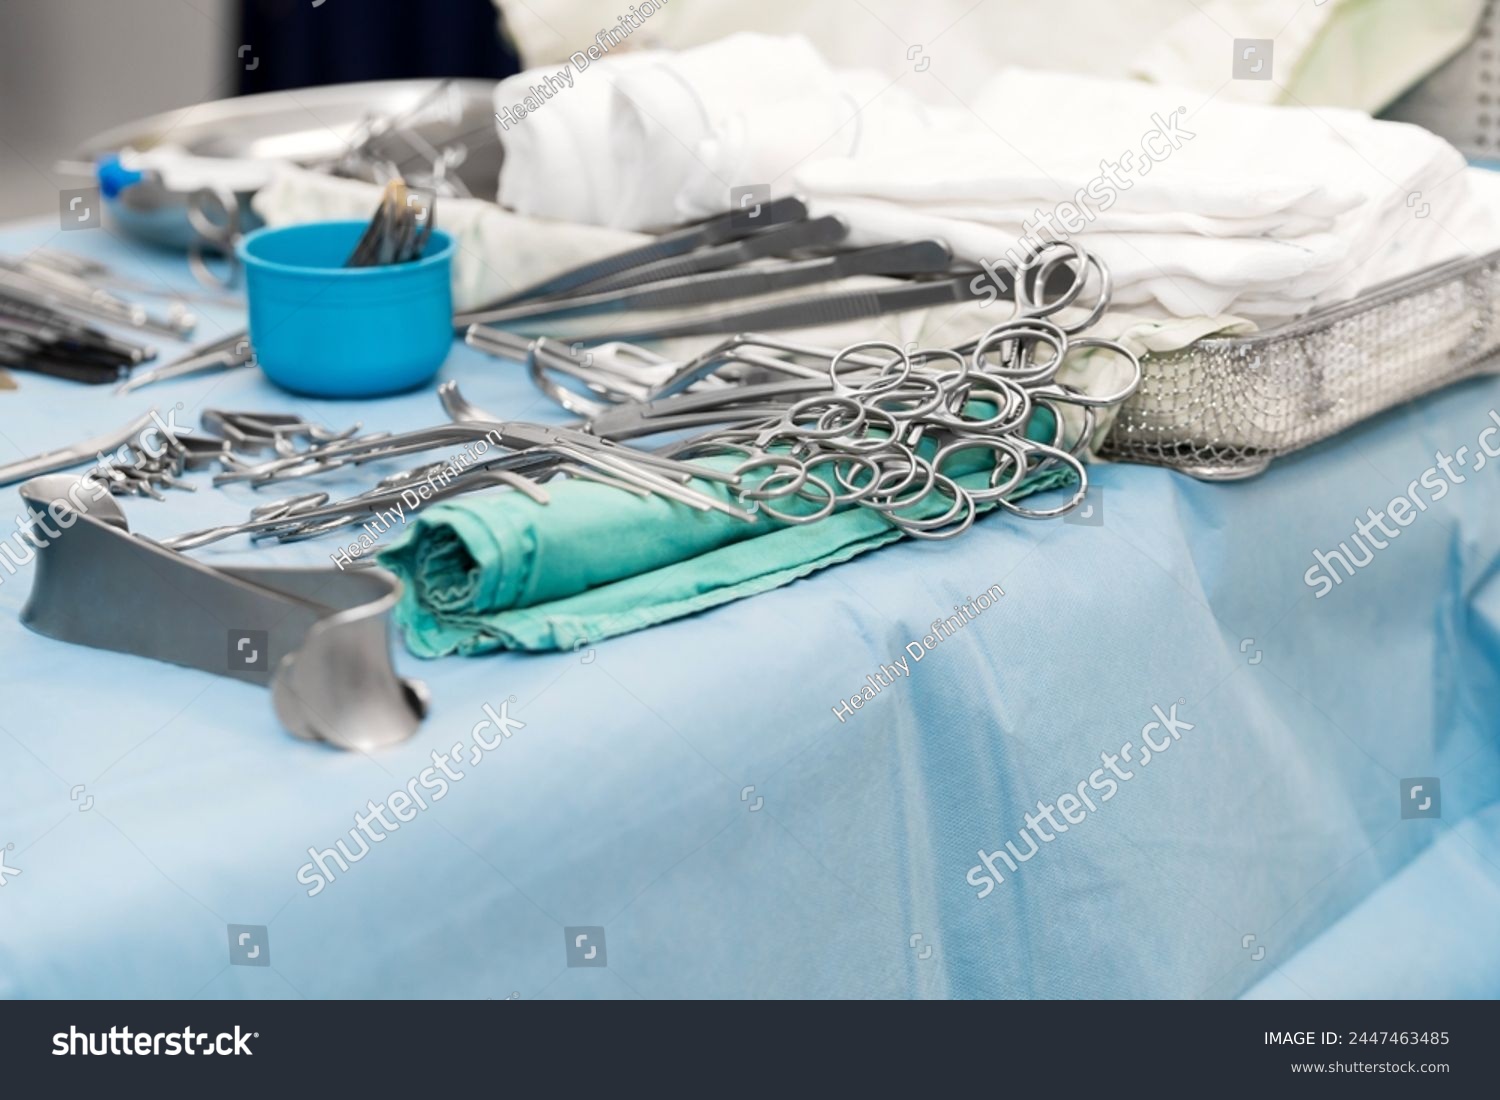 Sterile surgical instruments and tools including scalpels, scissors, forceps and tweezers arranged on a table for a surgery, Sterilized surgical instruments on the blue or green wrap	 #2447463485